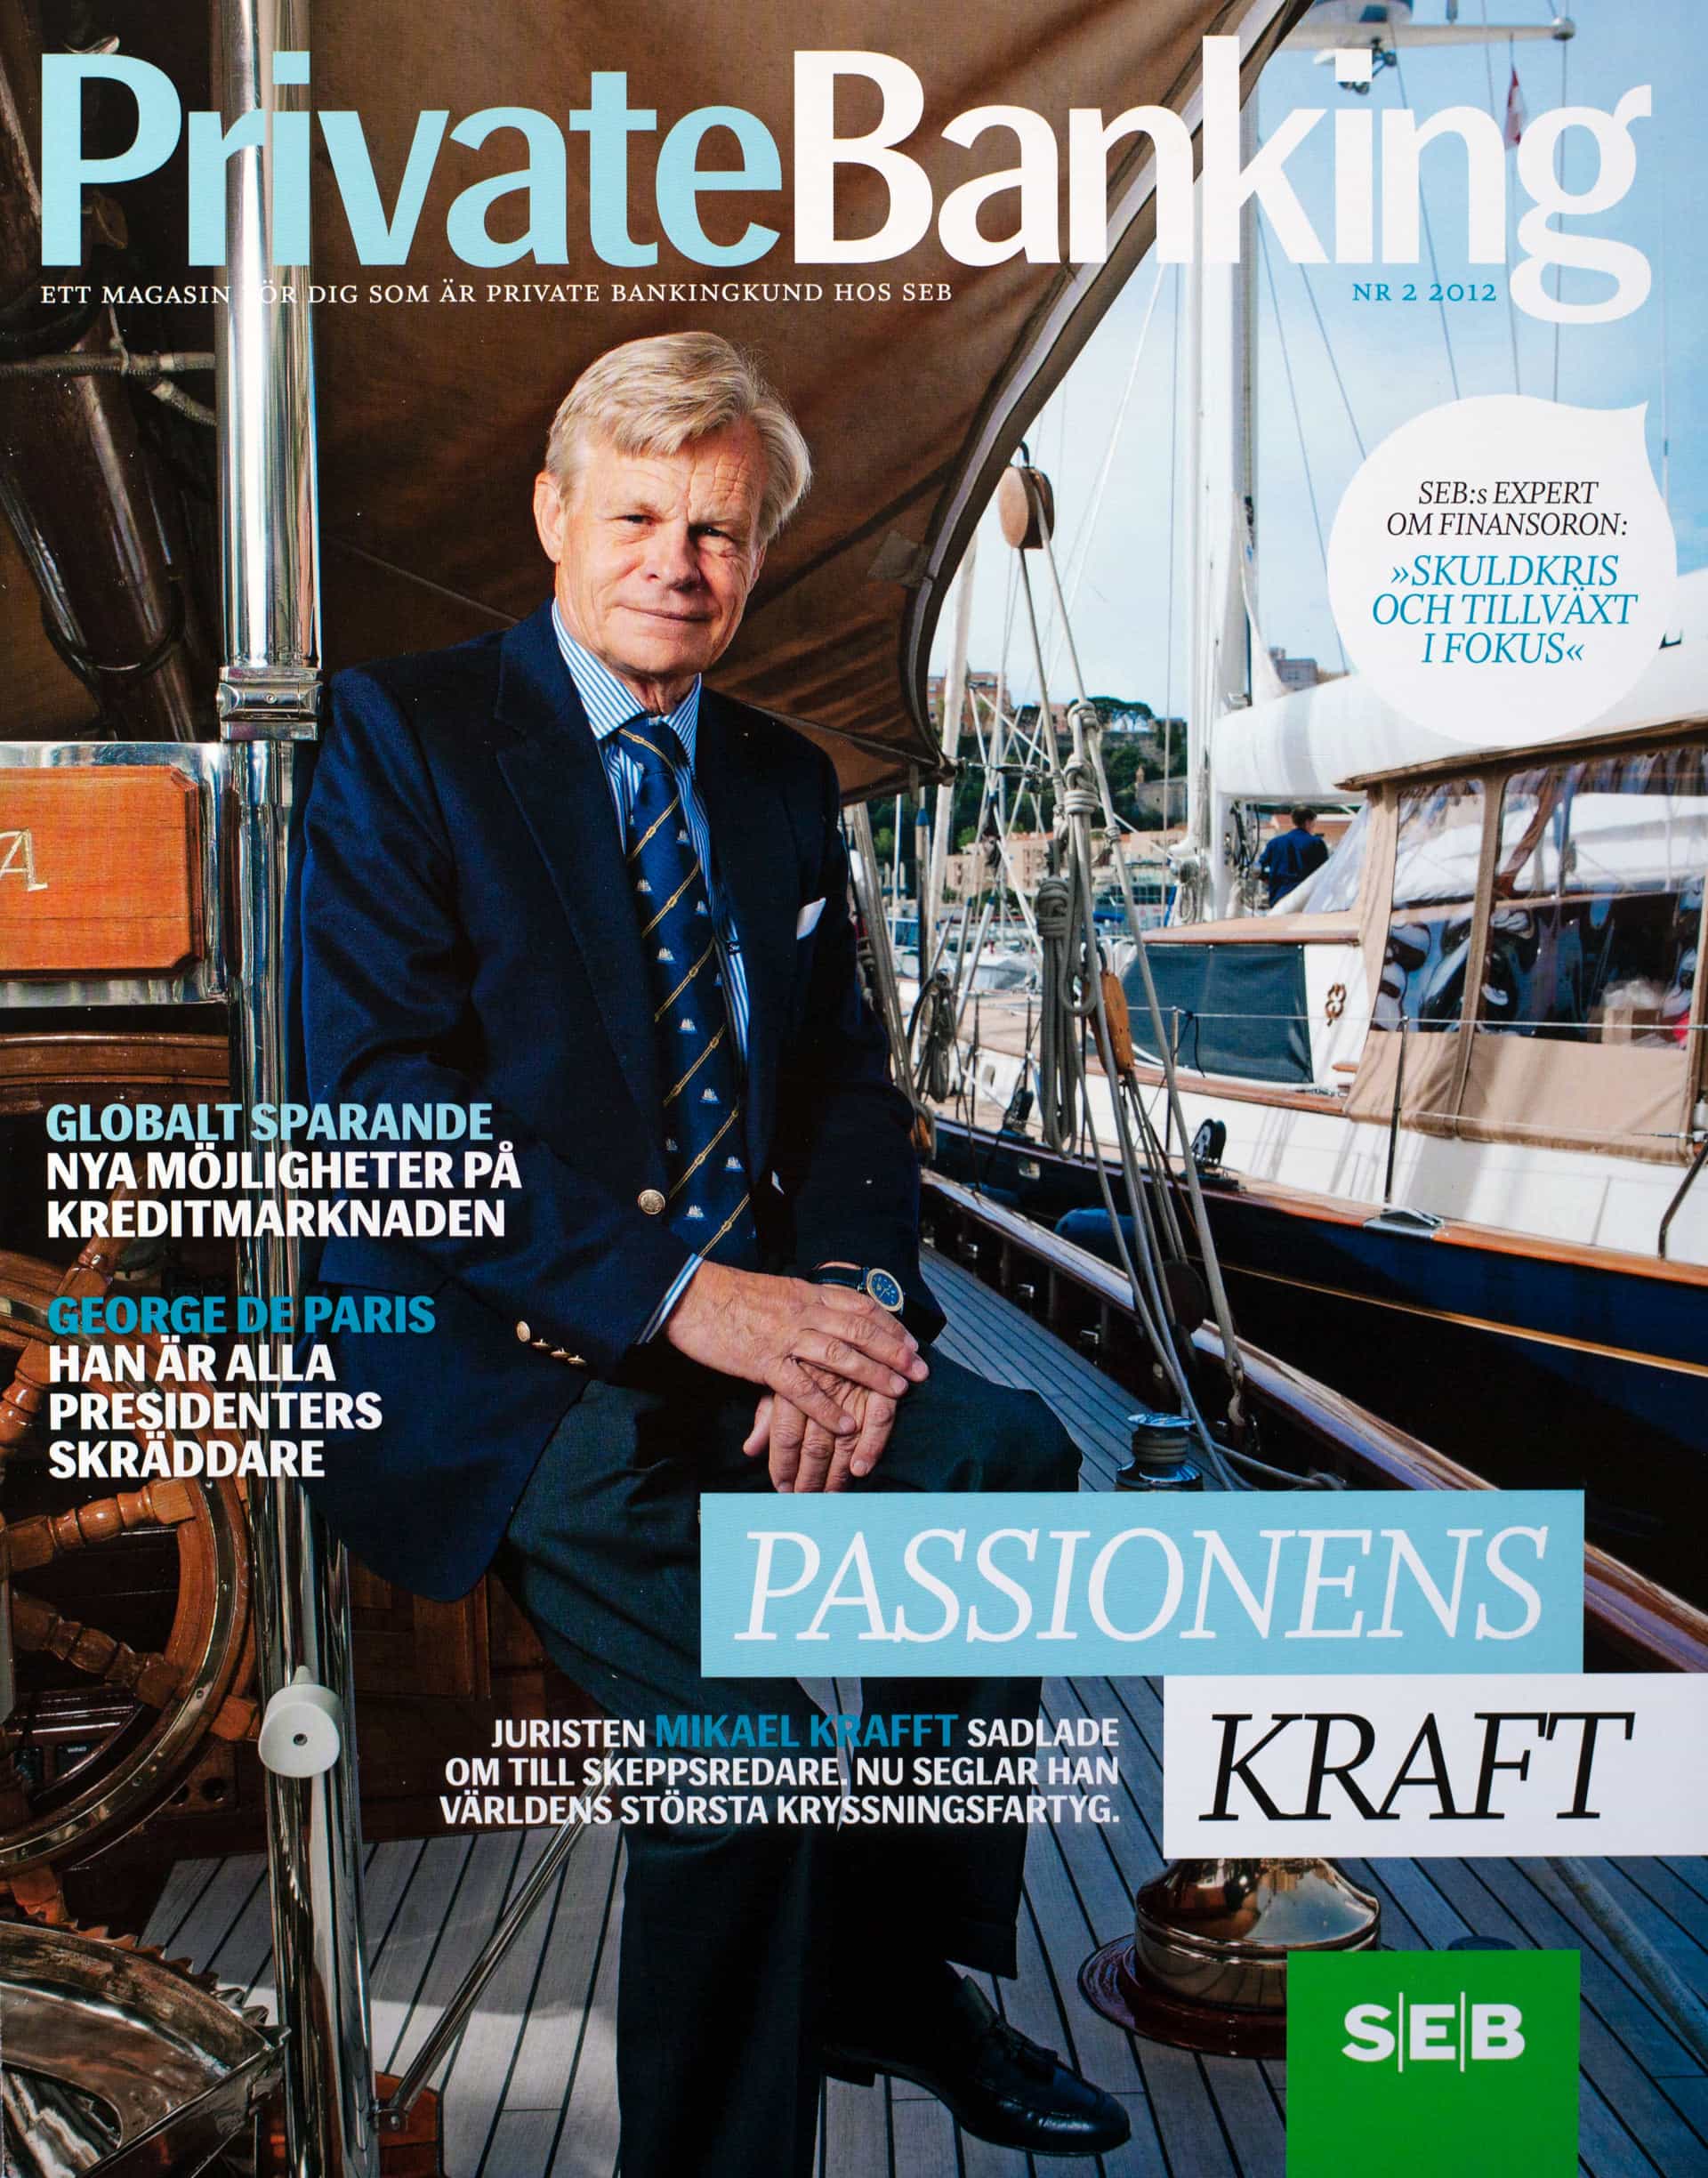 Magazine cover showing a man in suit and tie sitting on the deck of a sailing yacht in harbour